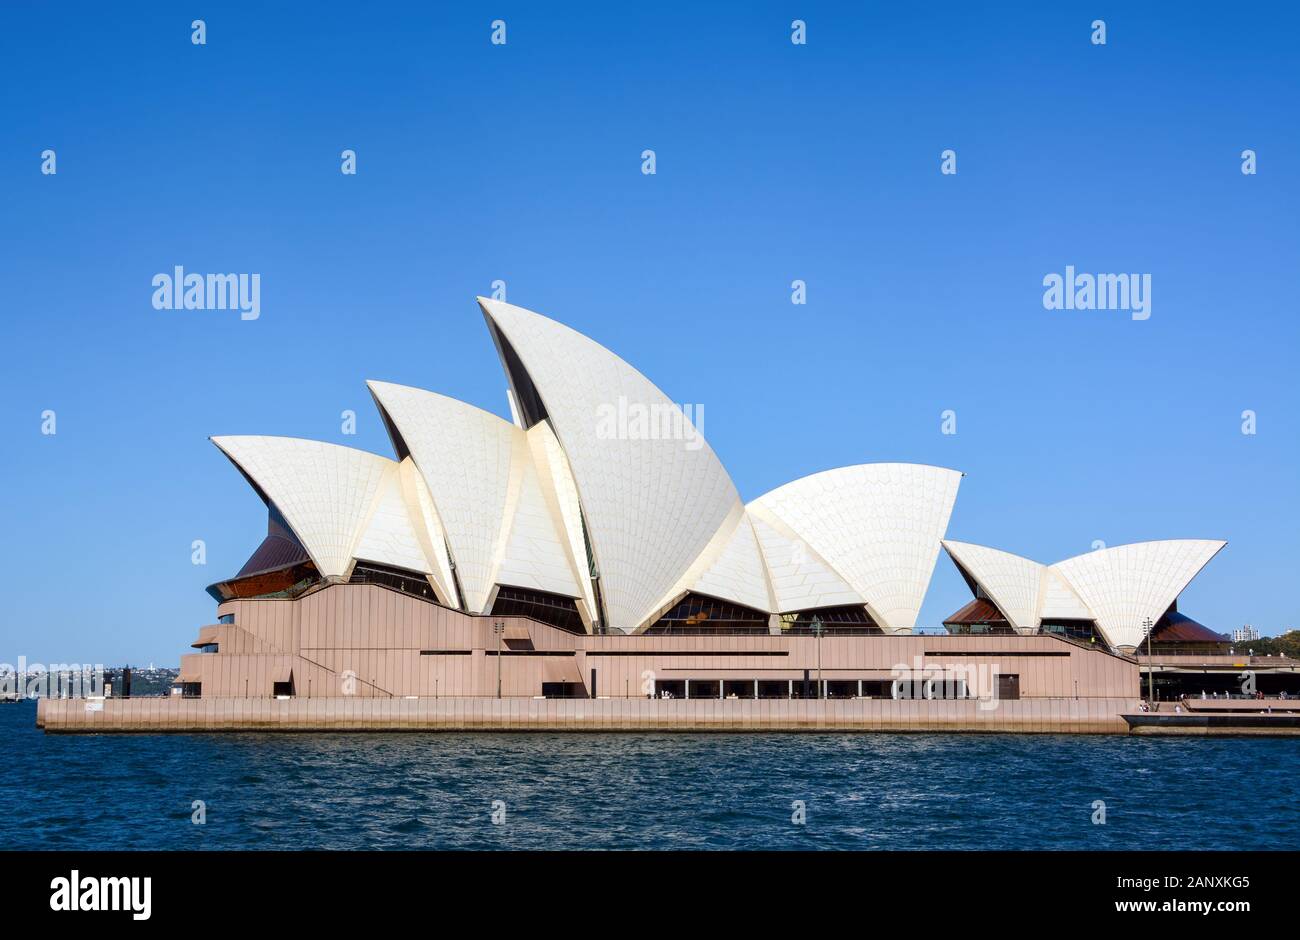 SYDNEY, AUSTRALIA - MARCH 18, 2018 - Brilliant architectural design of the iconic Sydney Opera House sails seen from a clean, straight side view Stock Photo